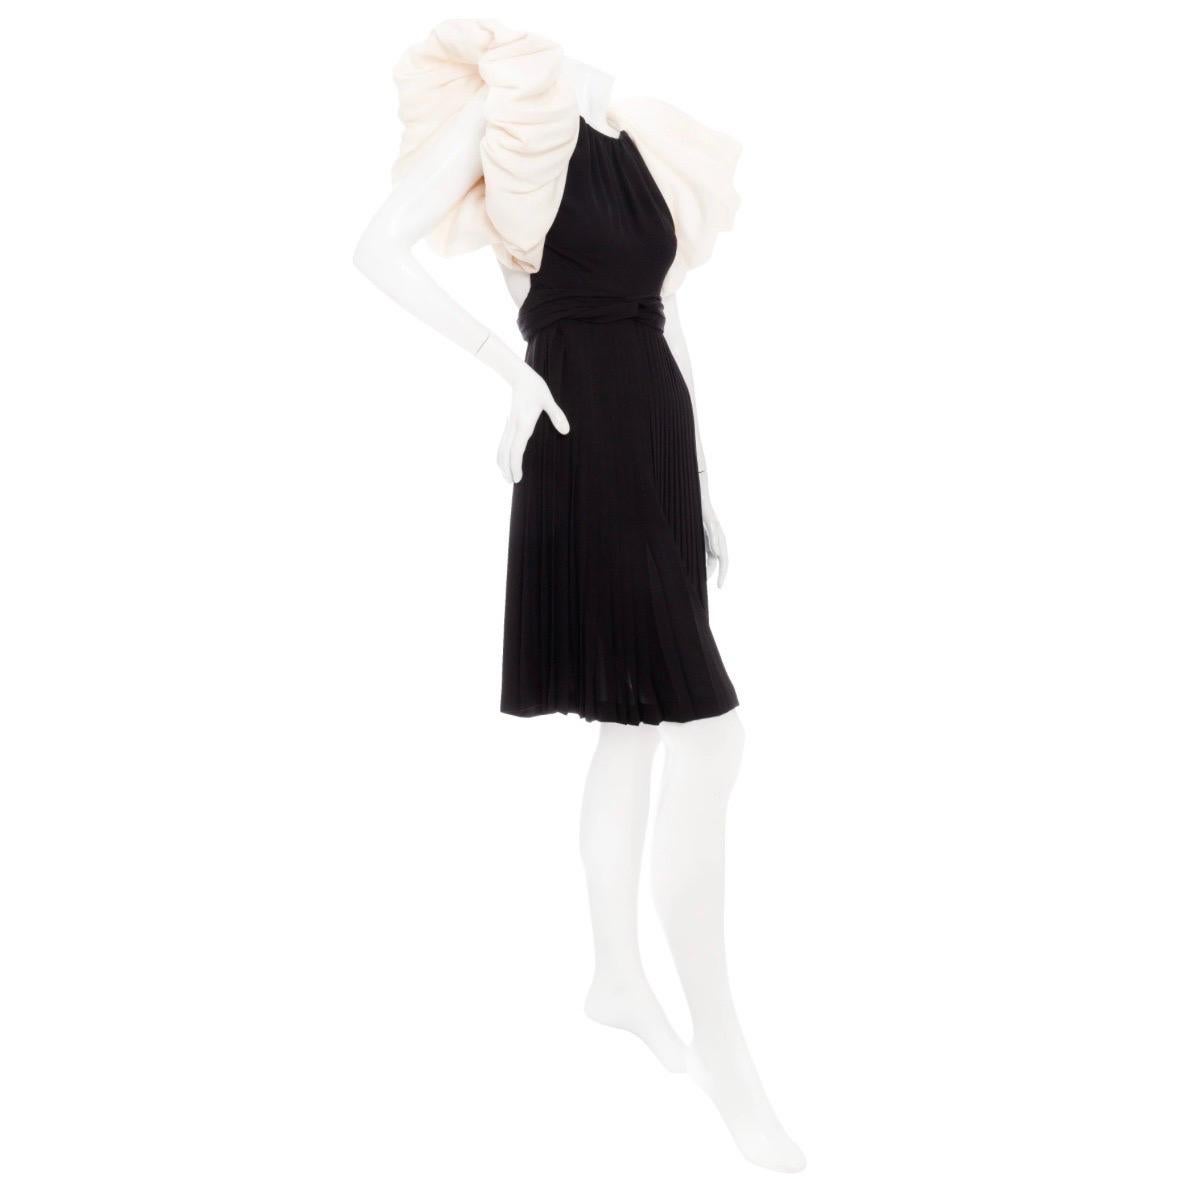 James Galanos 1980s Black and White Puff Sleeve Pleated Open Back Dress

Vintage; circa 1980s
Made for Nan Duskin Philadelphia boutique
Black/Cream White
Bubble puff sleeves
Round neckline
Infinity twist waist detail
Pleated front only (plain